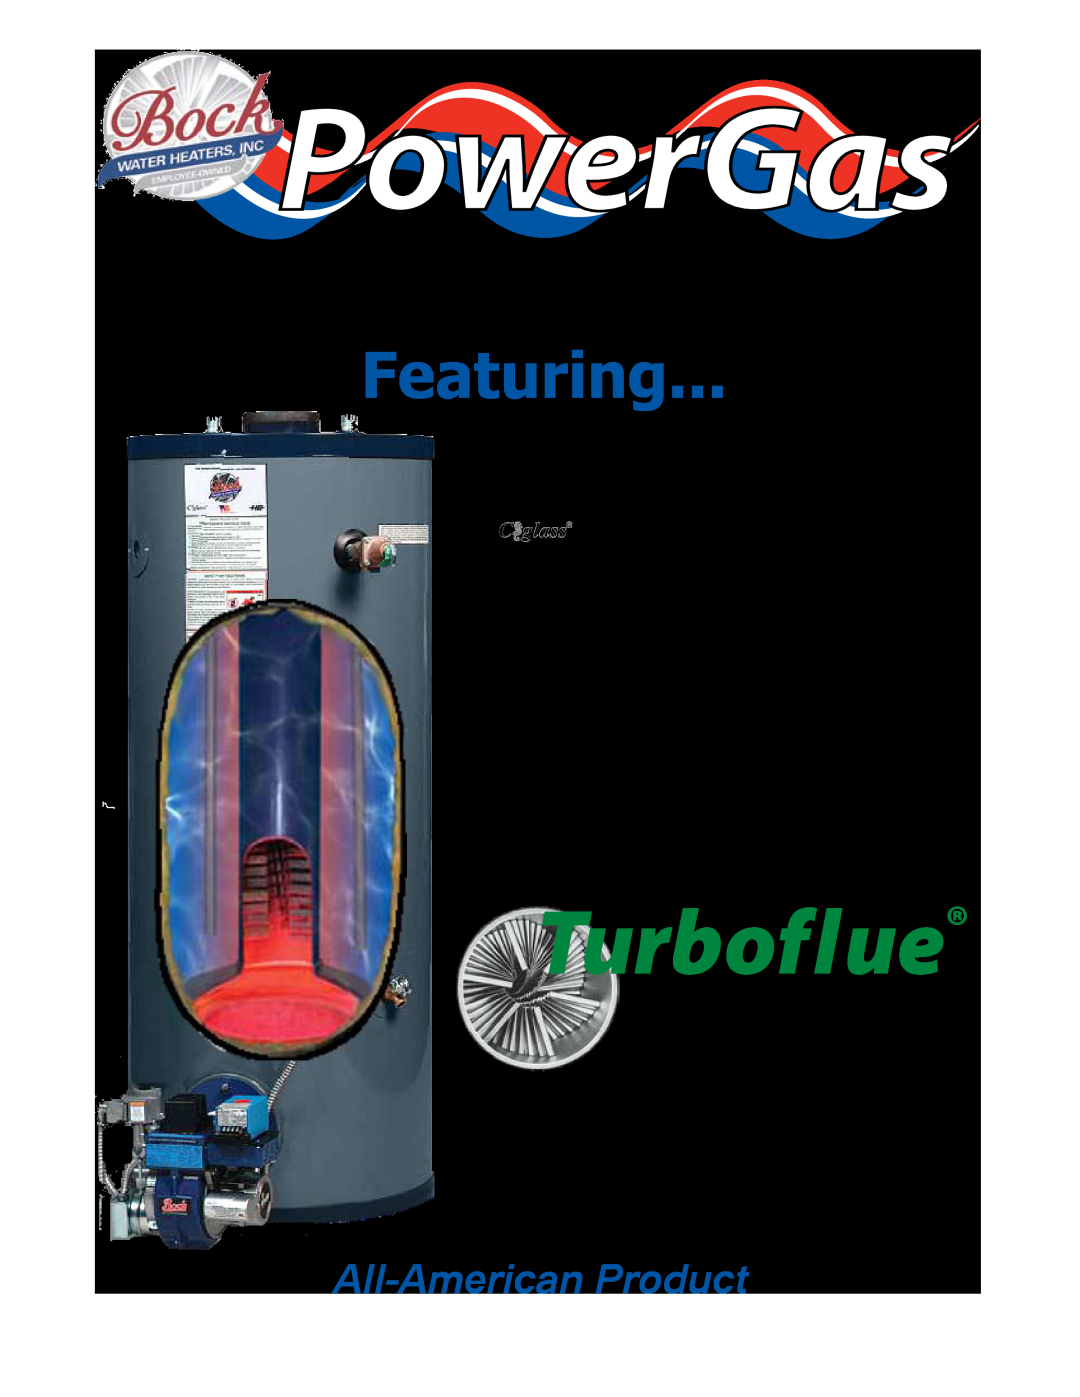 Bock Water heaters 541PG warranty PowerGas, Turboflue, Commercial Water Heaters, Featuring, All-American Product 